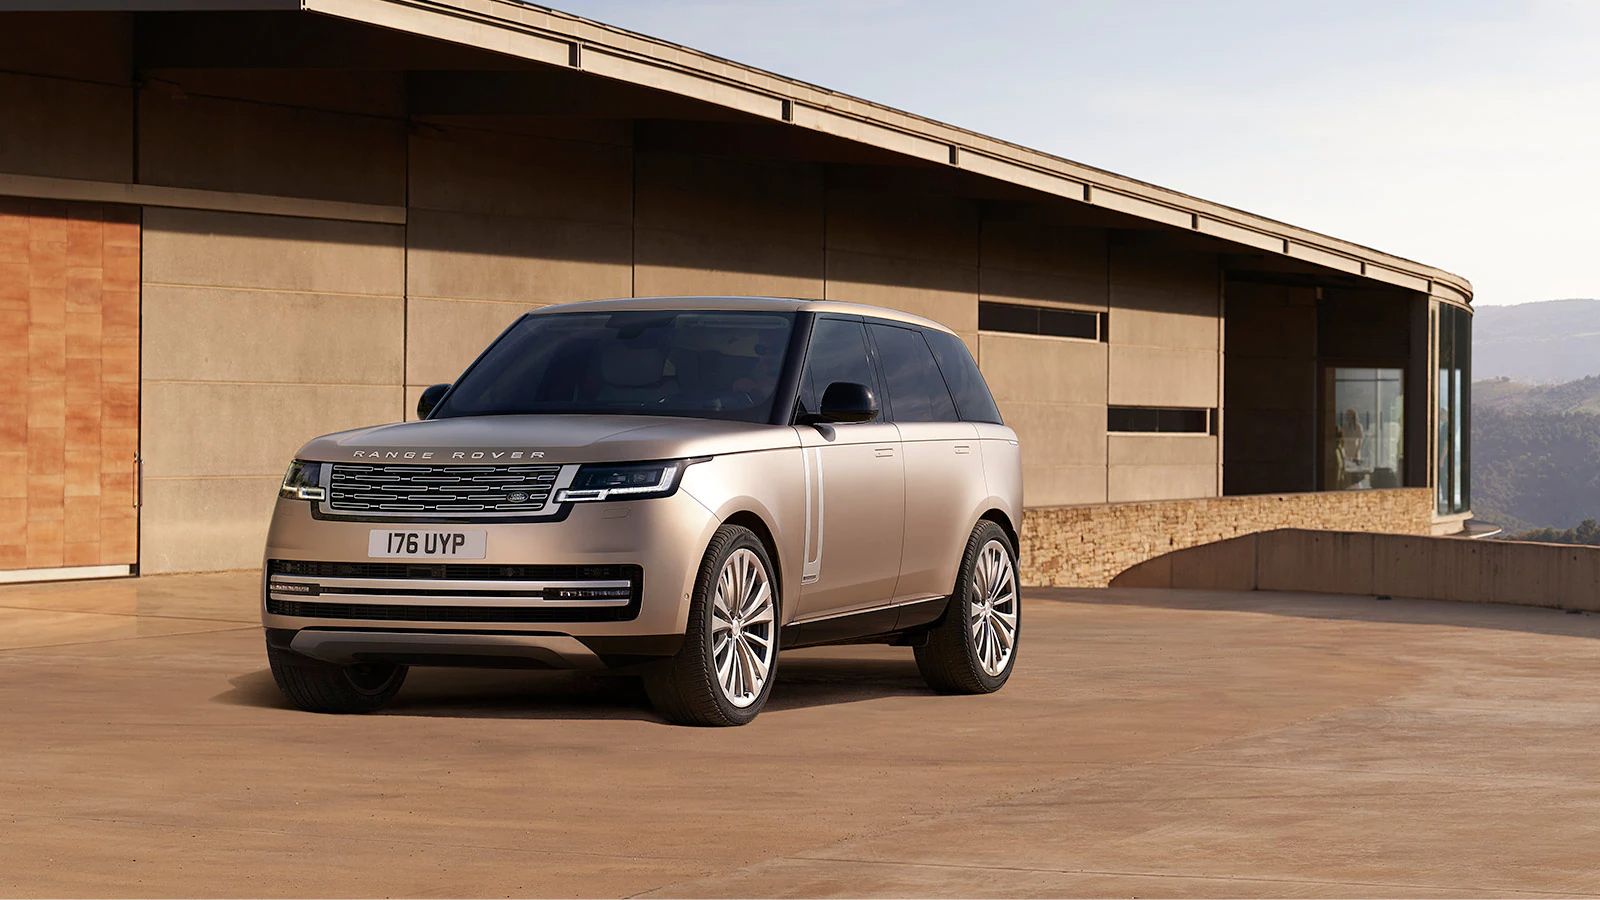 2022 Range Rover exterior front parked